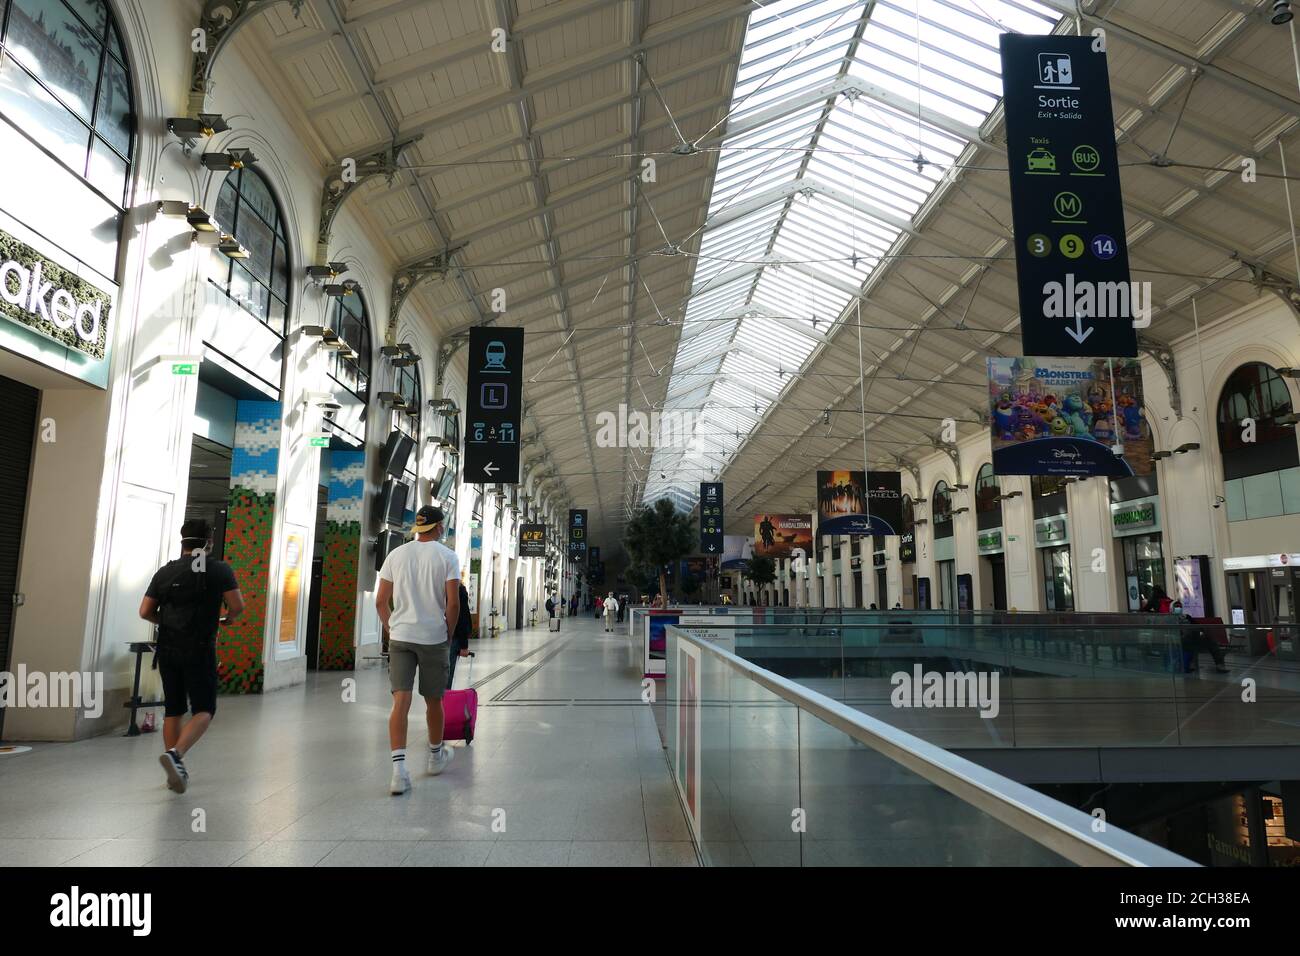 Paris, France. September 13 2020. Entrance hall of Saint Lazare station. Access area to train platforms. Public transport for travellers. Stock Photo